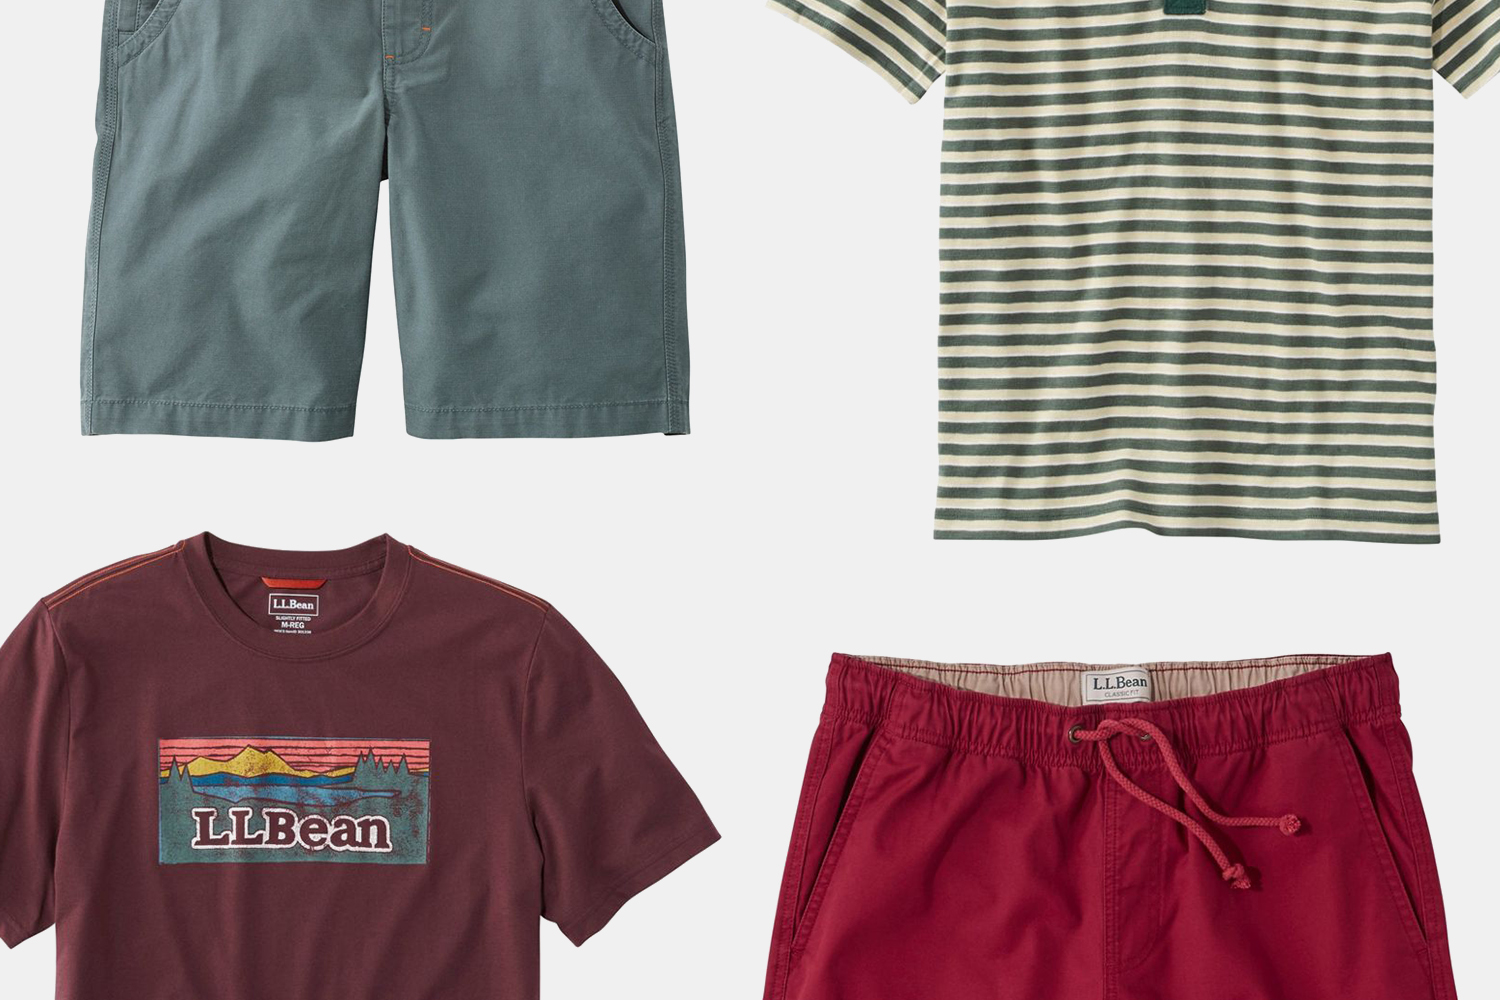 L.L.Bean's Summer Sale Is Up to 50% Off